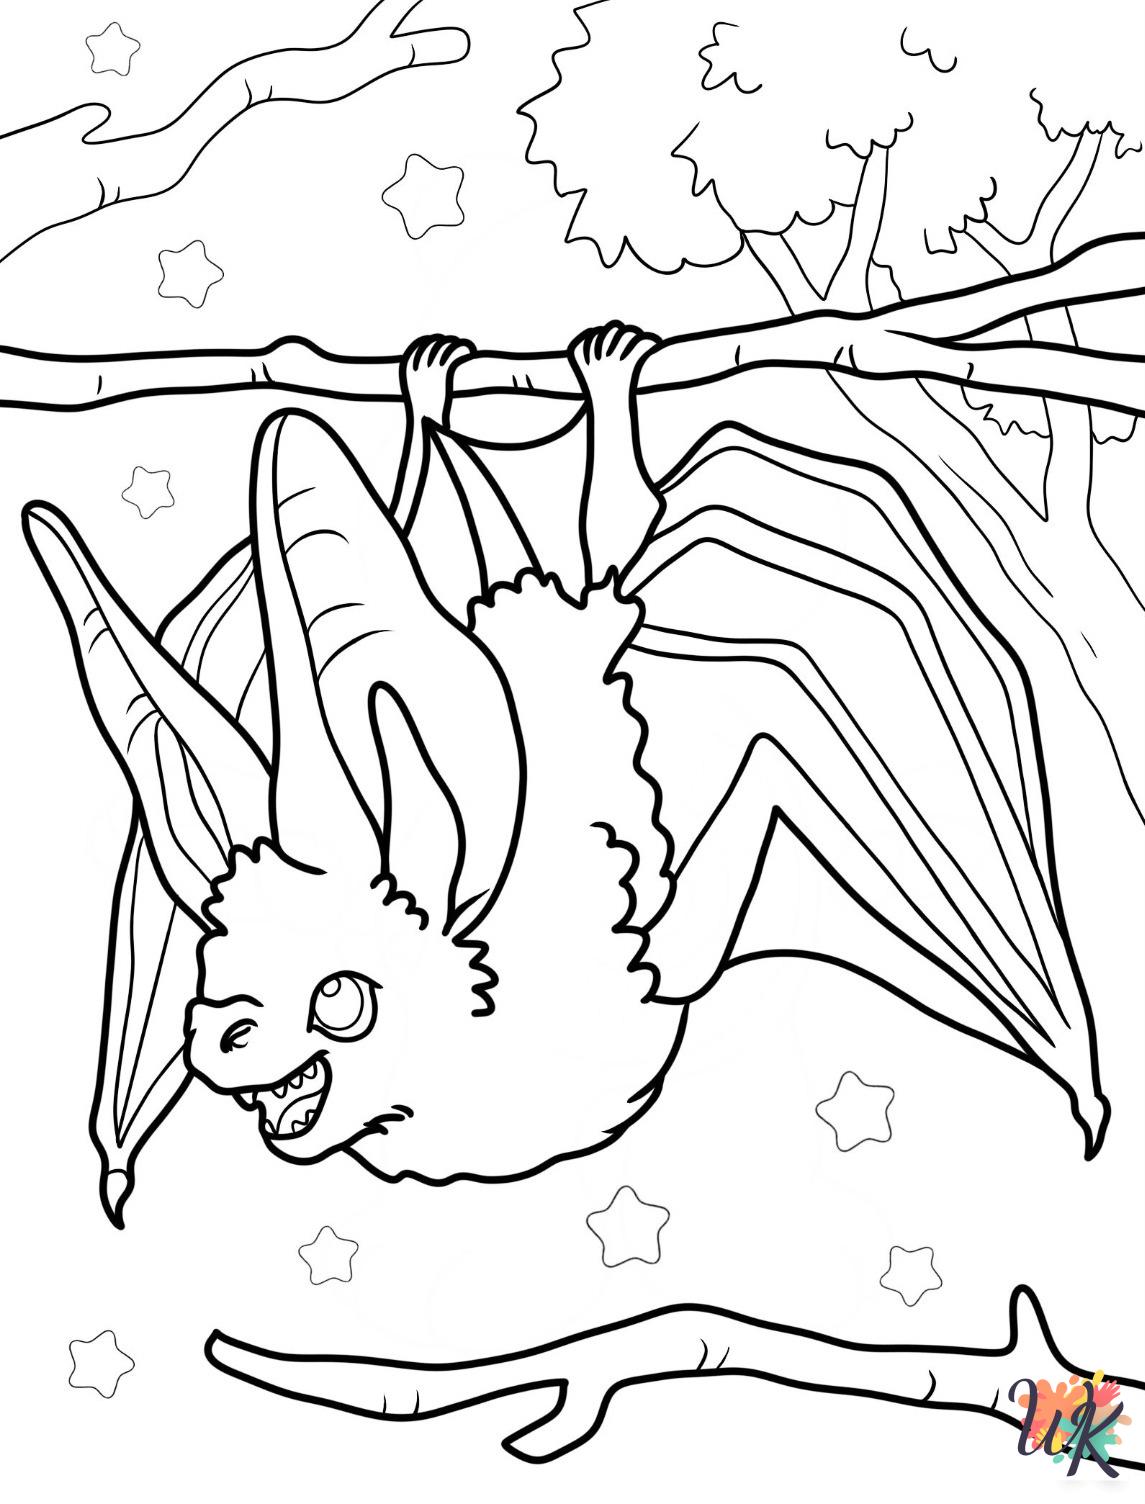 old-fashioned Bat coloring pages